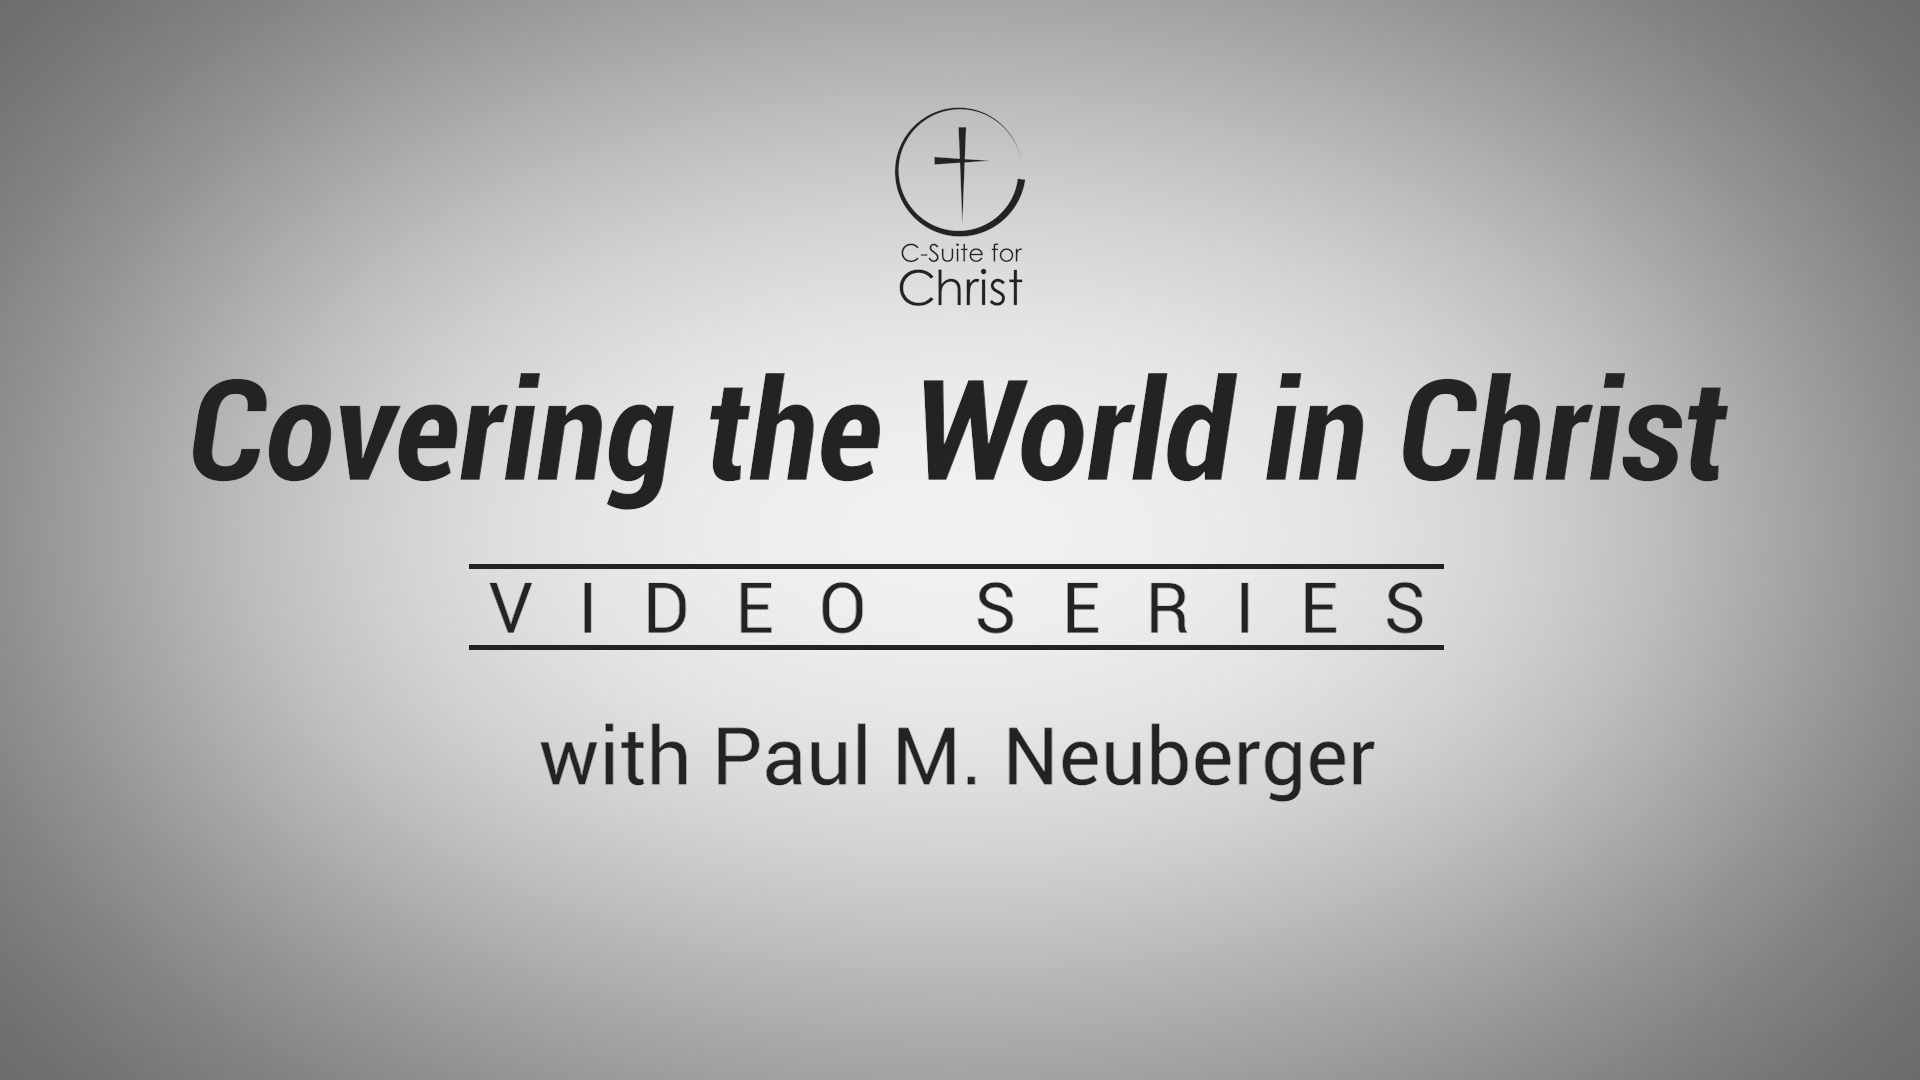 Covering the World in Christ Video Series.